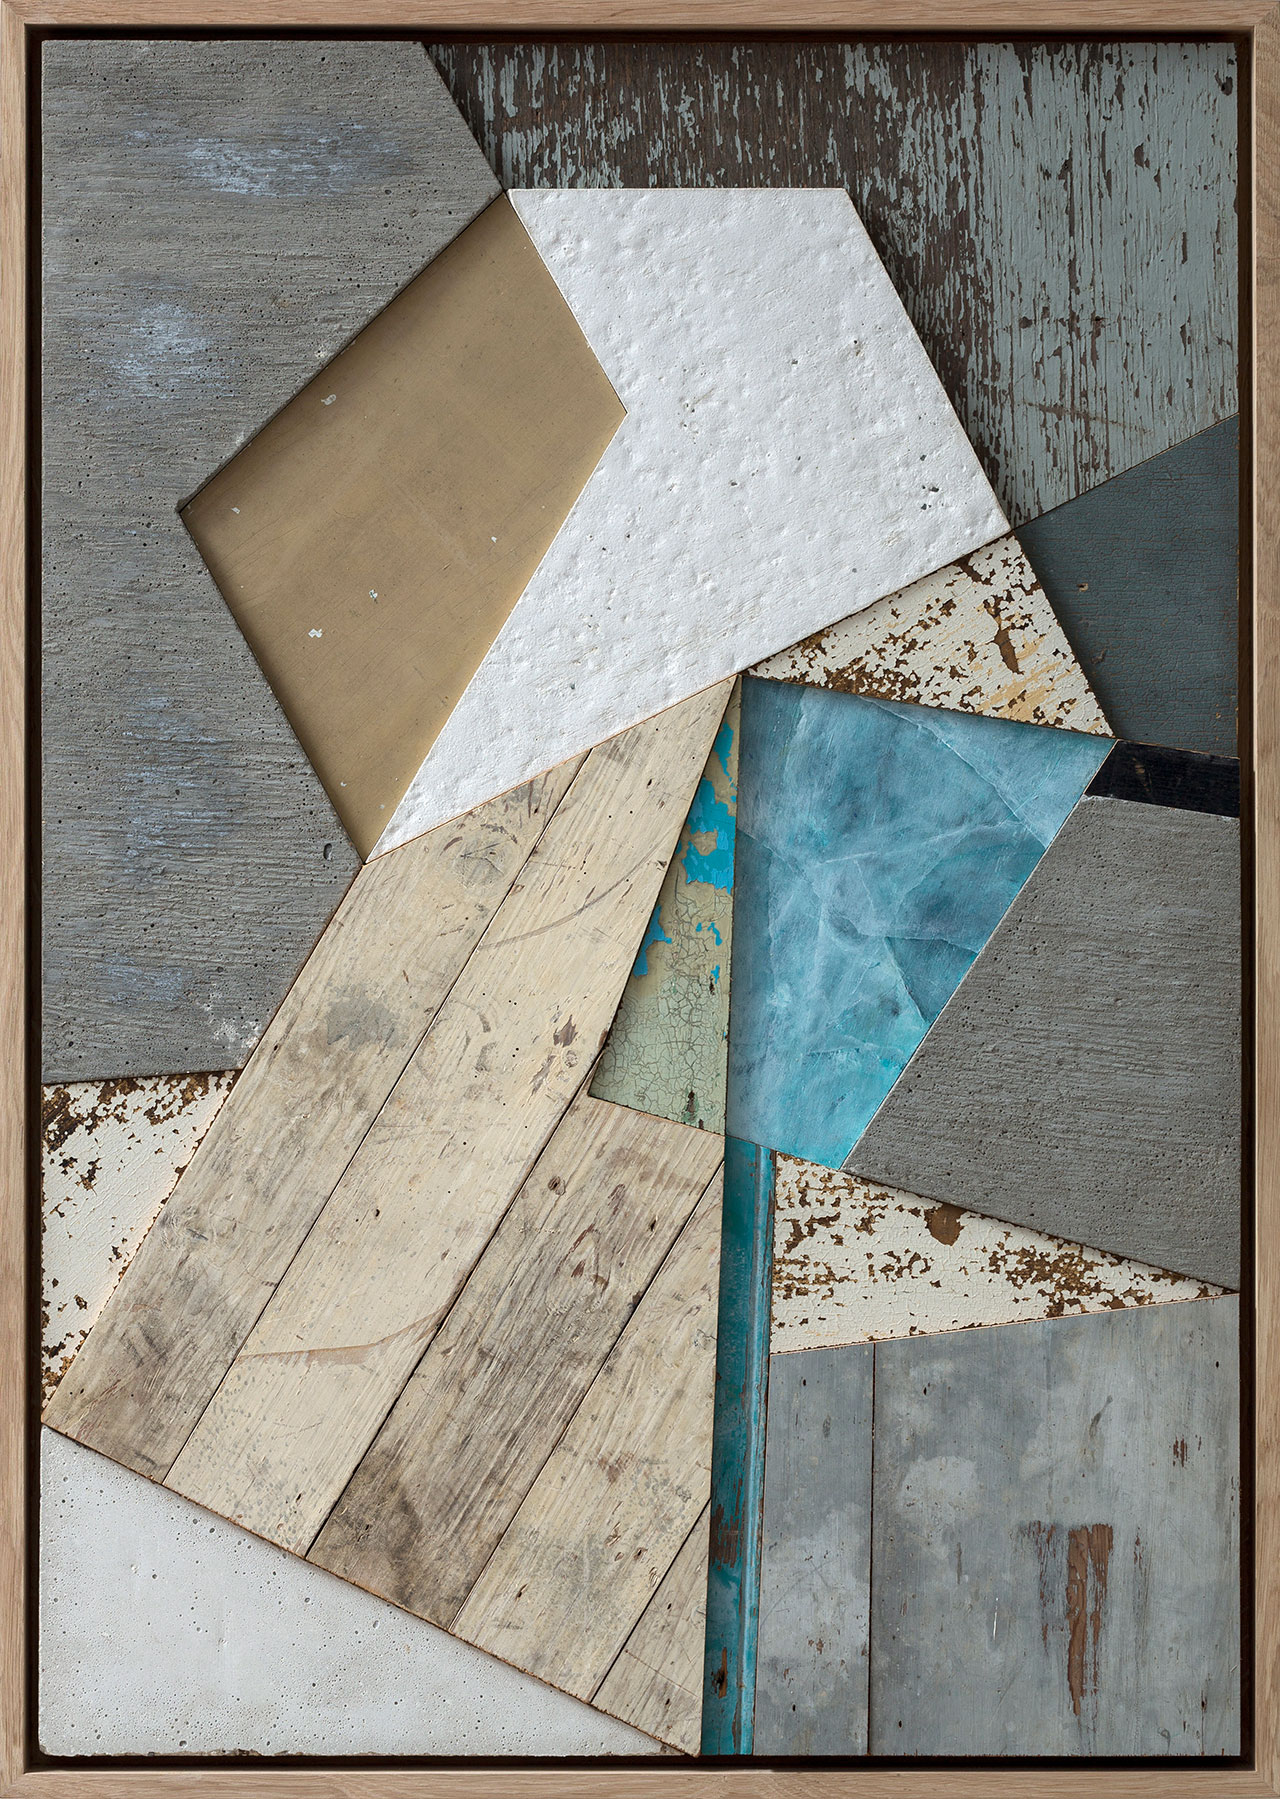 Summer is gone, 2015. Recycled wood, concrete, acrylic and medium on wood panel – Framed, 105 x 75 cm. Photo © Strook.